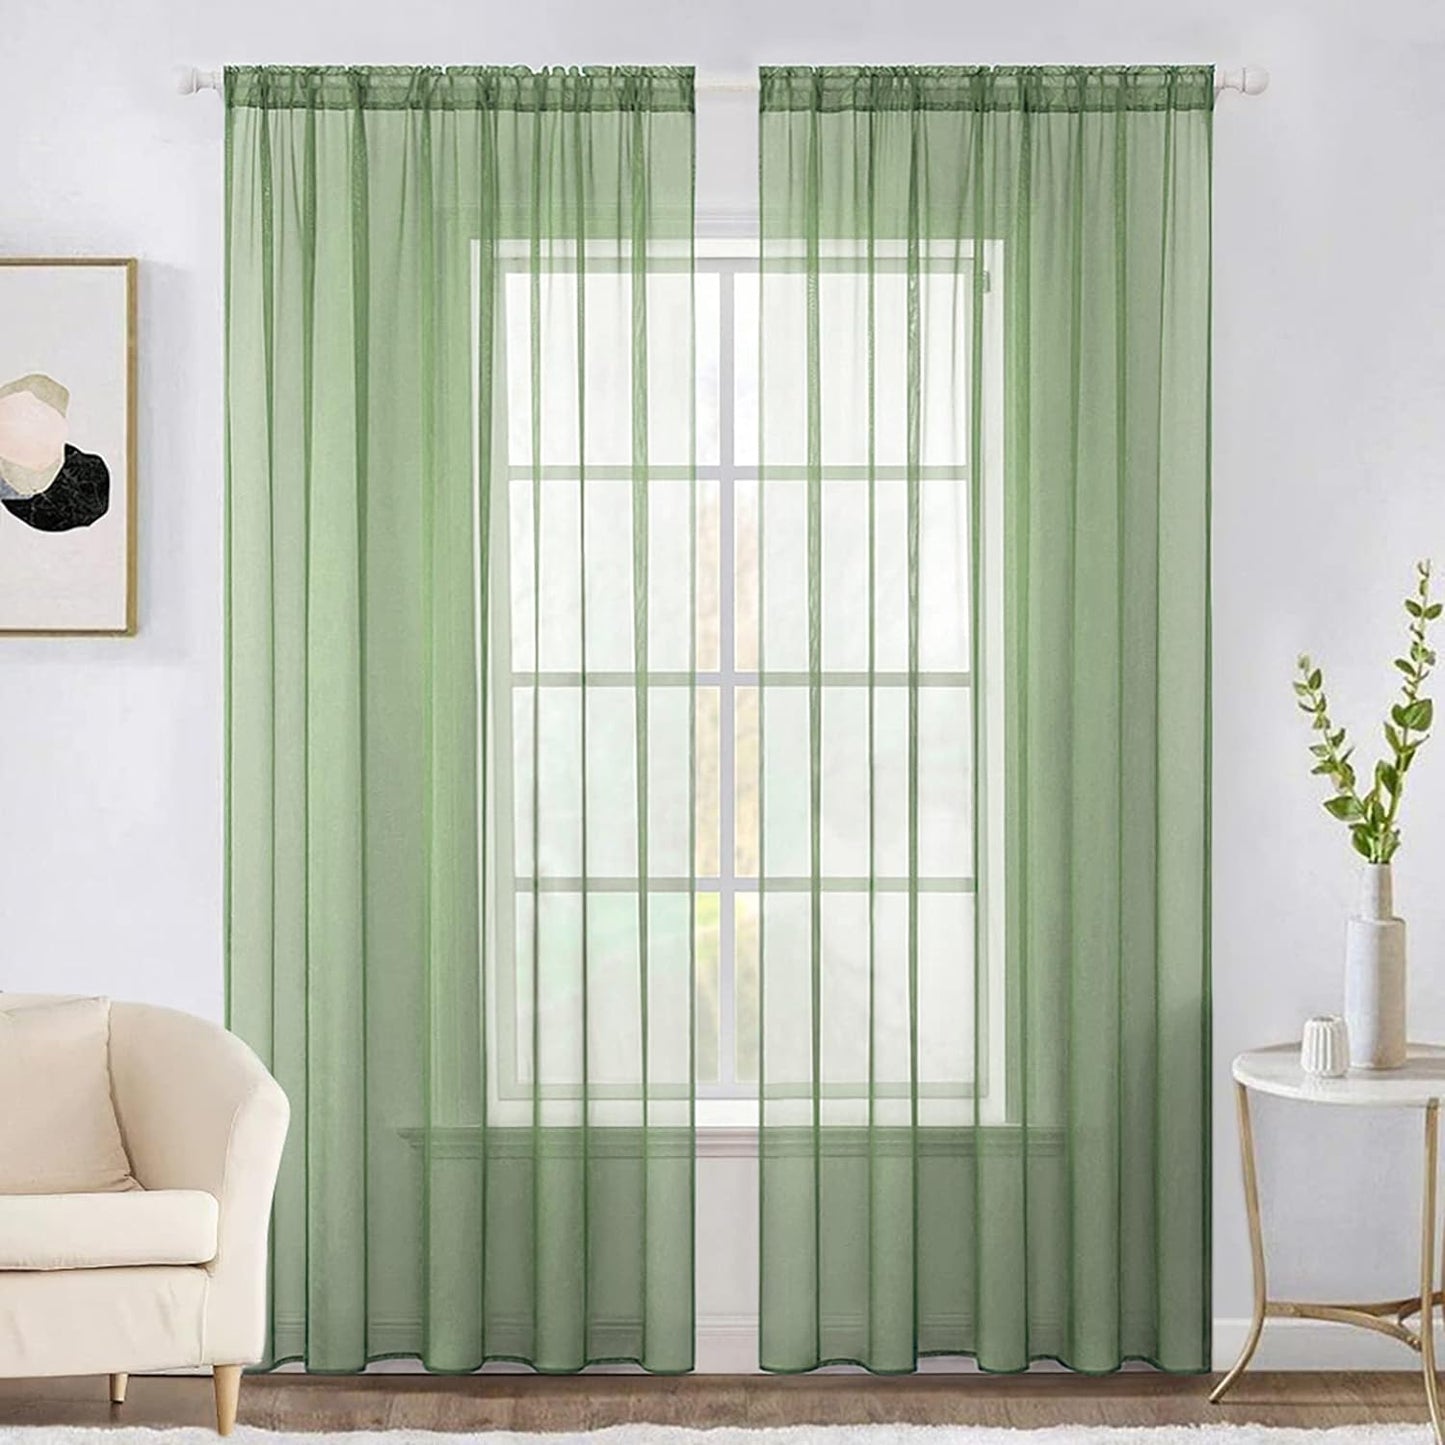 MIULEE White Sheer Curtains 96 Inches Long Window Curtains 2 Panels Solid Color Elegant Window Voile Panels/Drapes/Treatment for Bedroom Living Room (54 X 96 Inches White)  MIULEE Sage 54''W X 84''L 